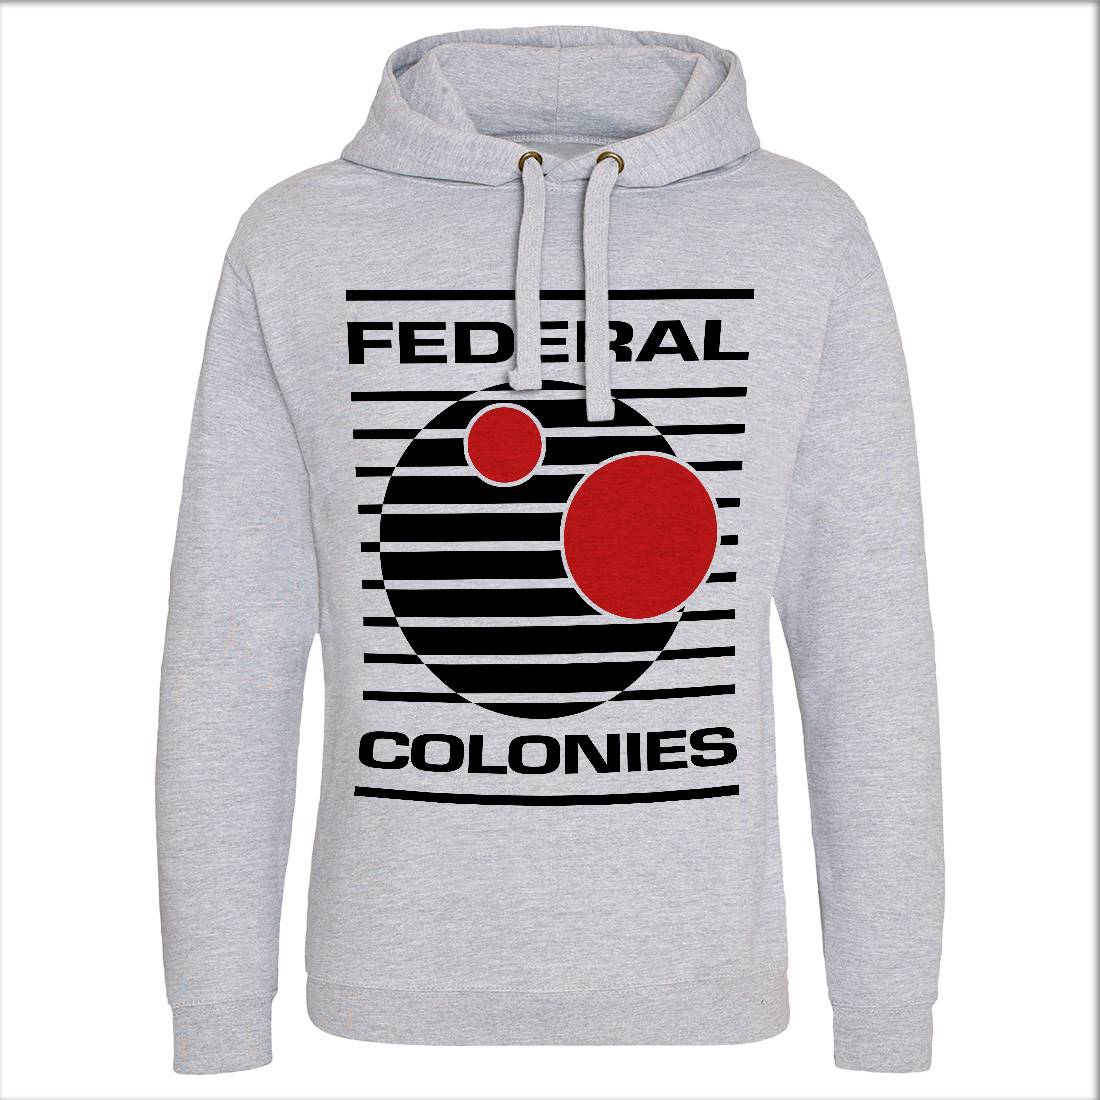 Federal Colonies Mens Hoodie Without Pocket Space D409